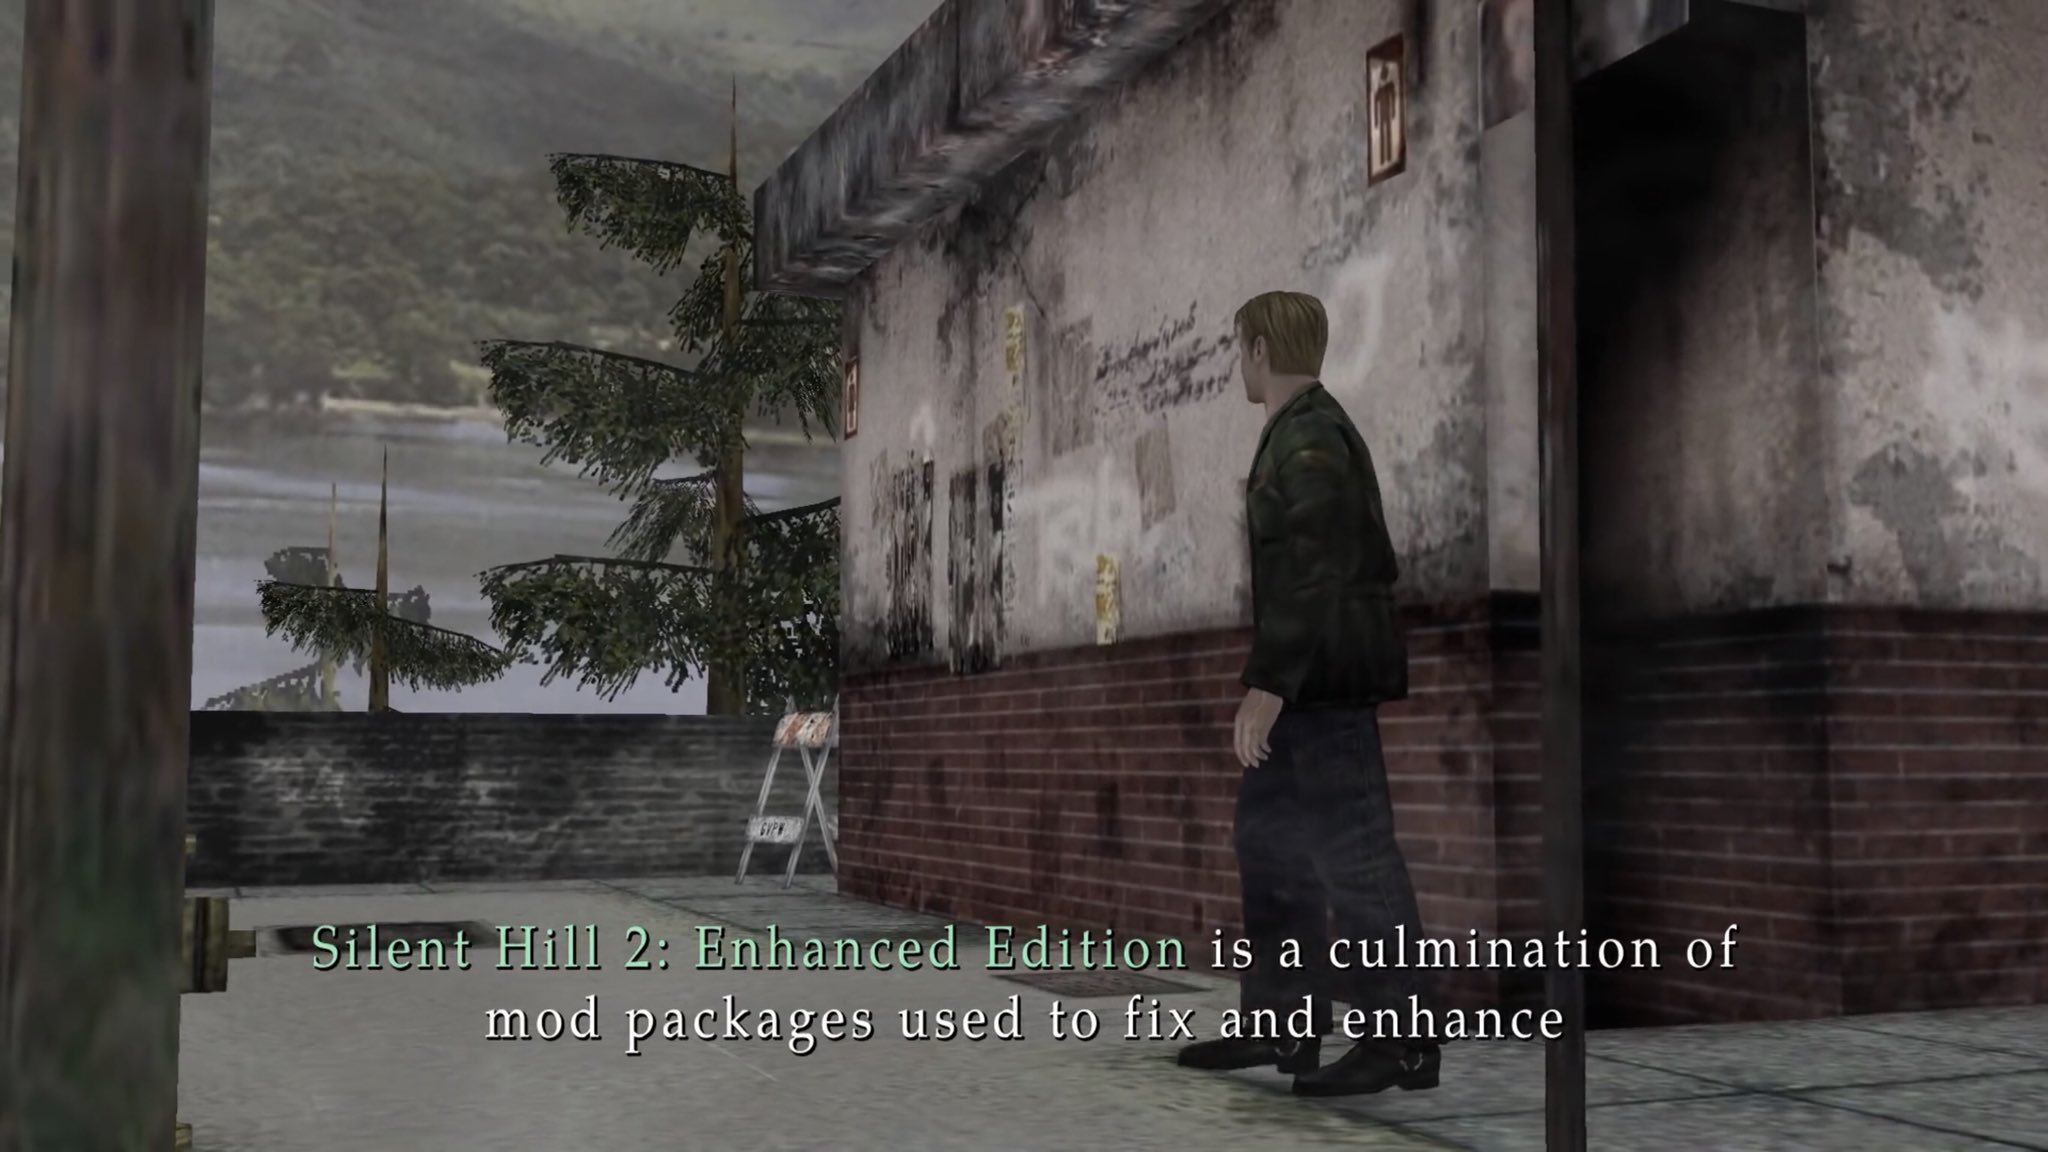 Silent Hill 2: Enhanced Edition on X: Please note a project on NexusMods  named Silent Hill 3: Enhanced Edition is NOT from us. We have no  affiliation with this project and cannot